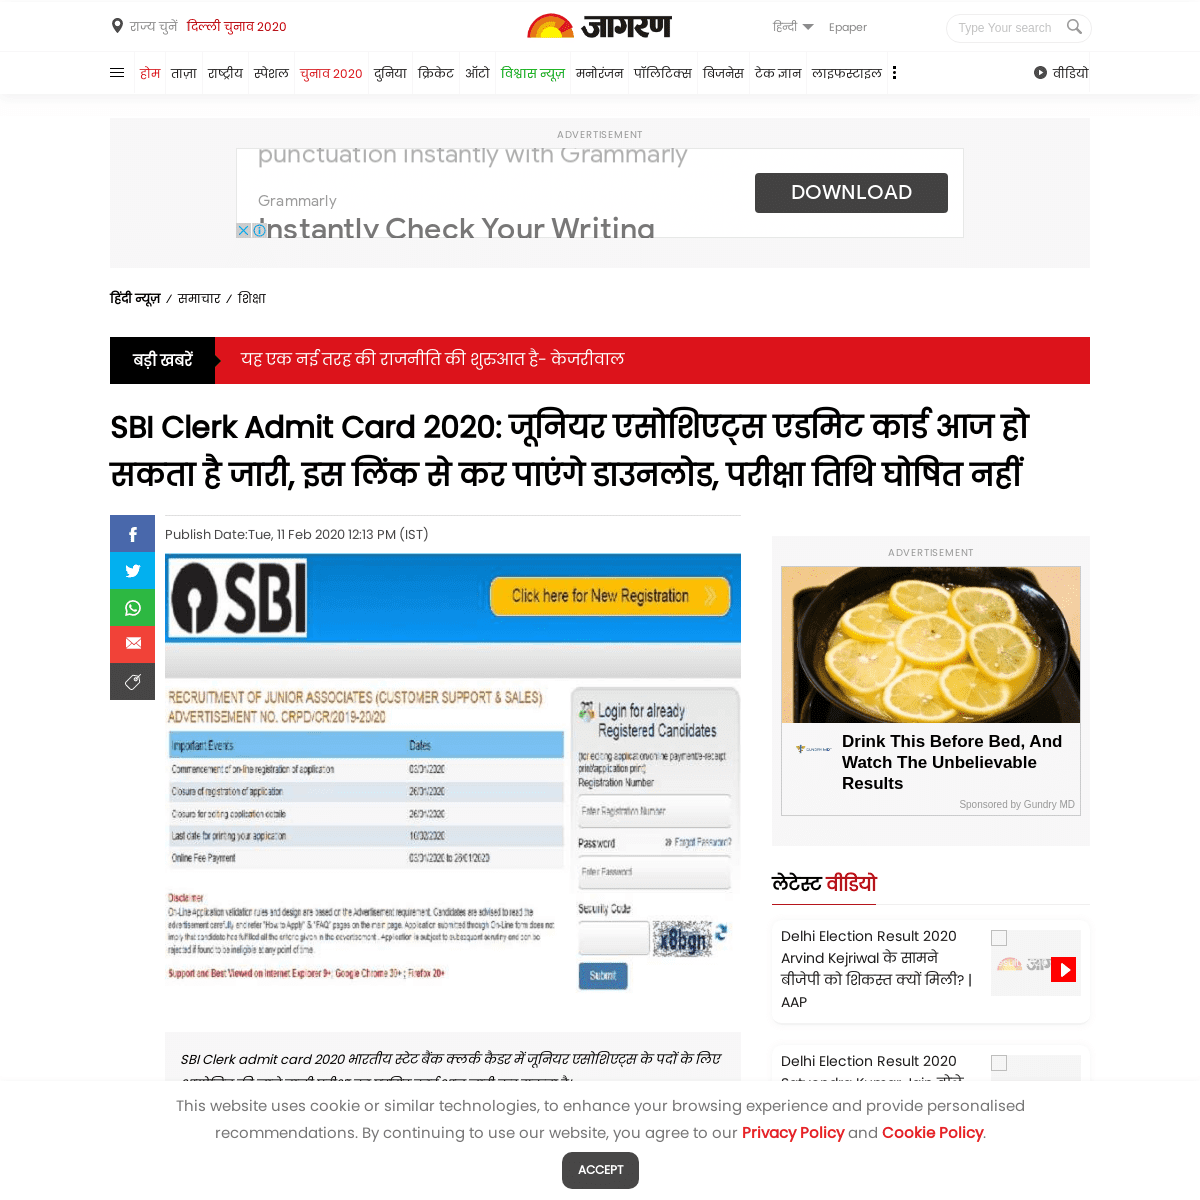 A complete backup of www.jagran.com/news/education-ibps-sbi-clerk-admit-card-2020-to-release-tomorrow-check-all-details-at-sbi-c